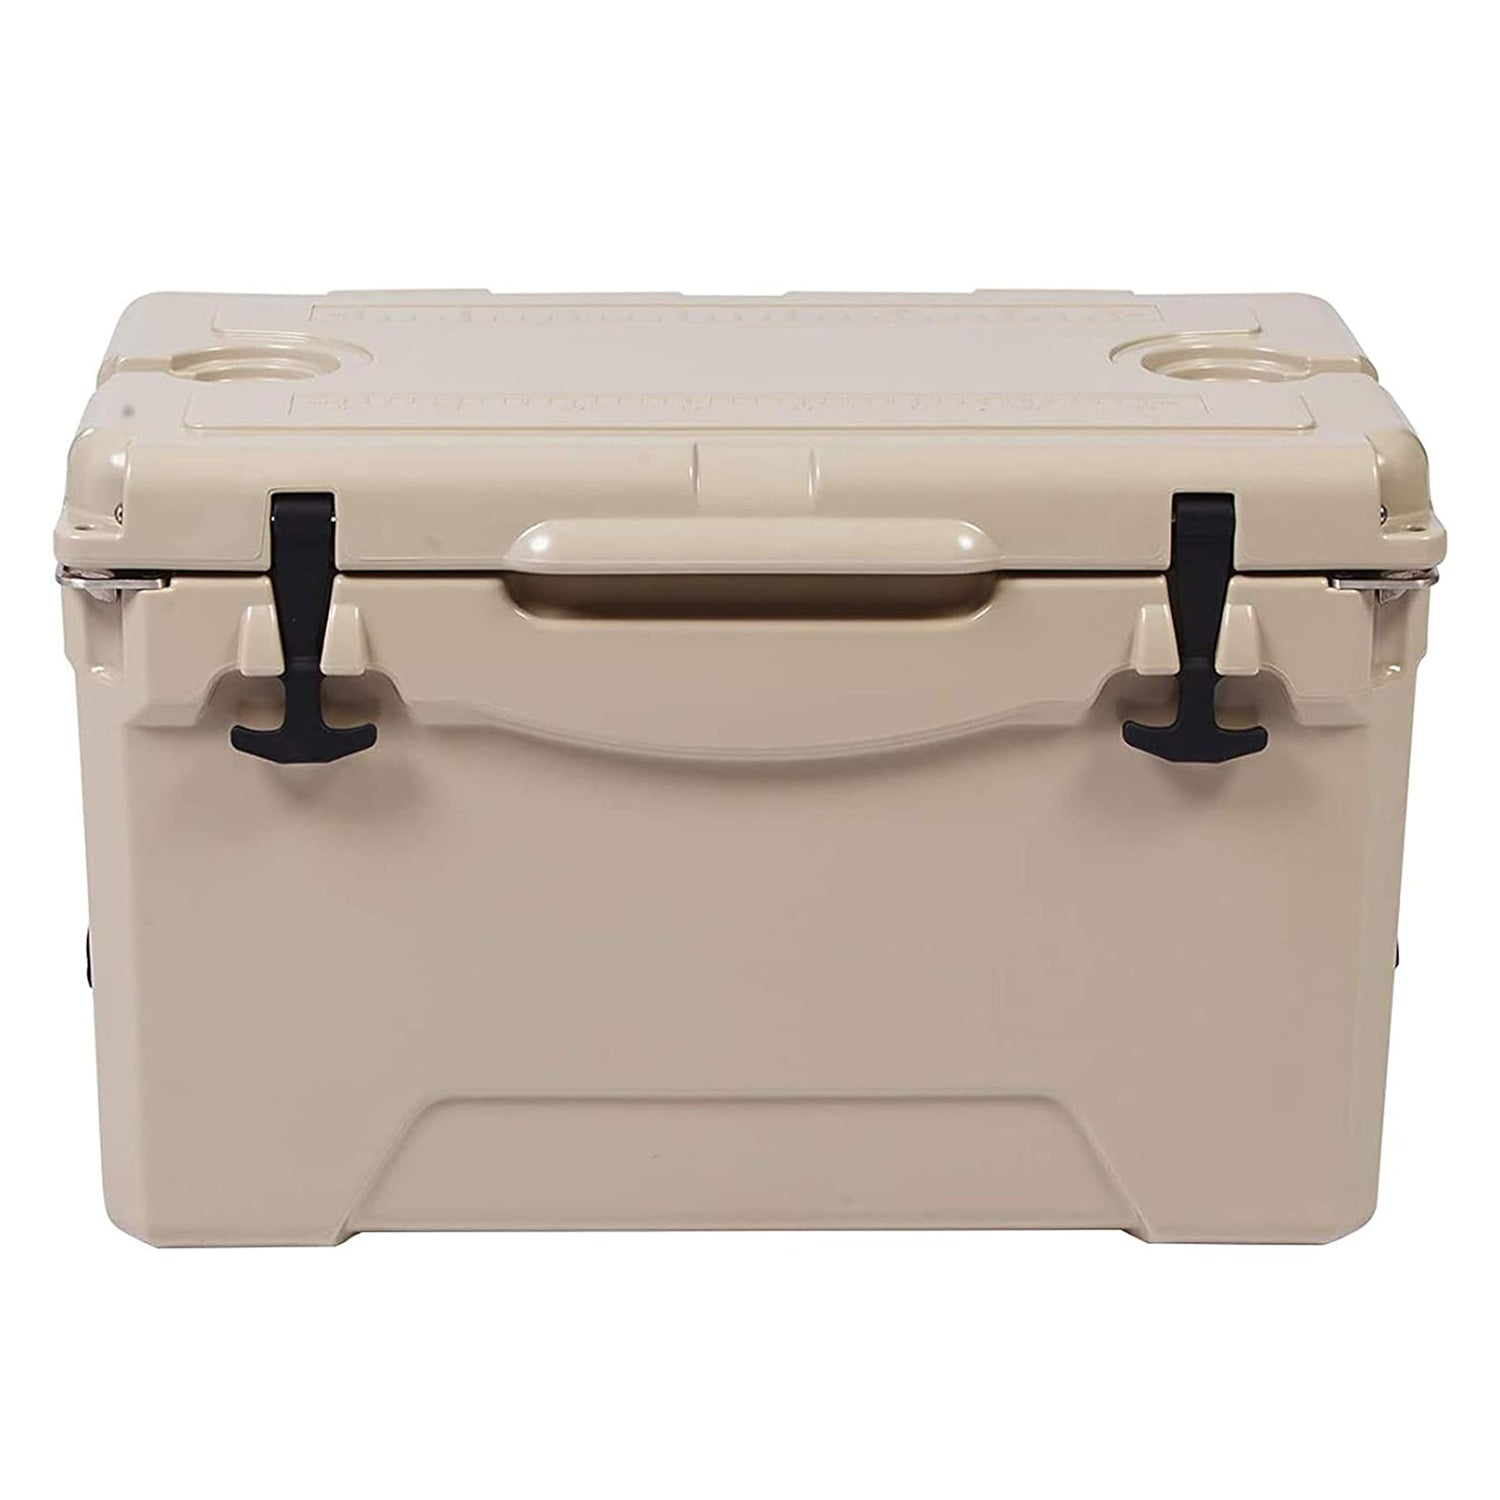 50QT Rotomolded Insulated Ice Cooler 3-5 Days Ice Chest with Built-in Fish Ruler, Bottle Opener, Cup Holder